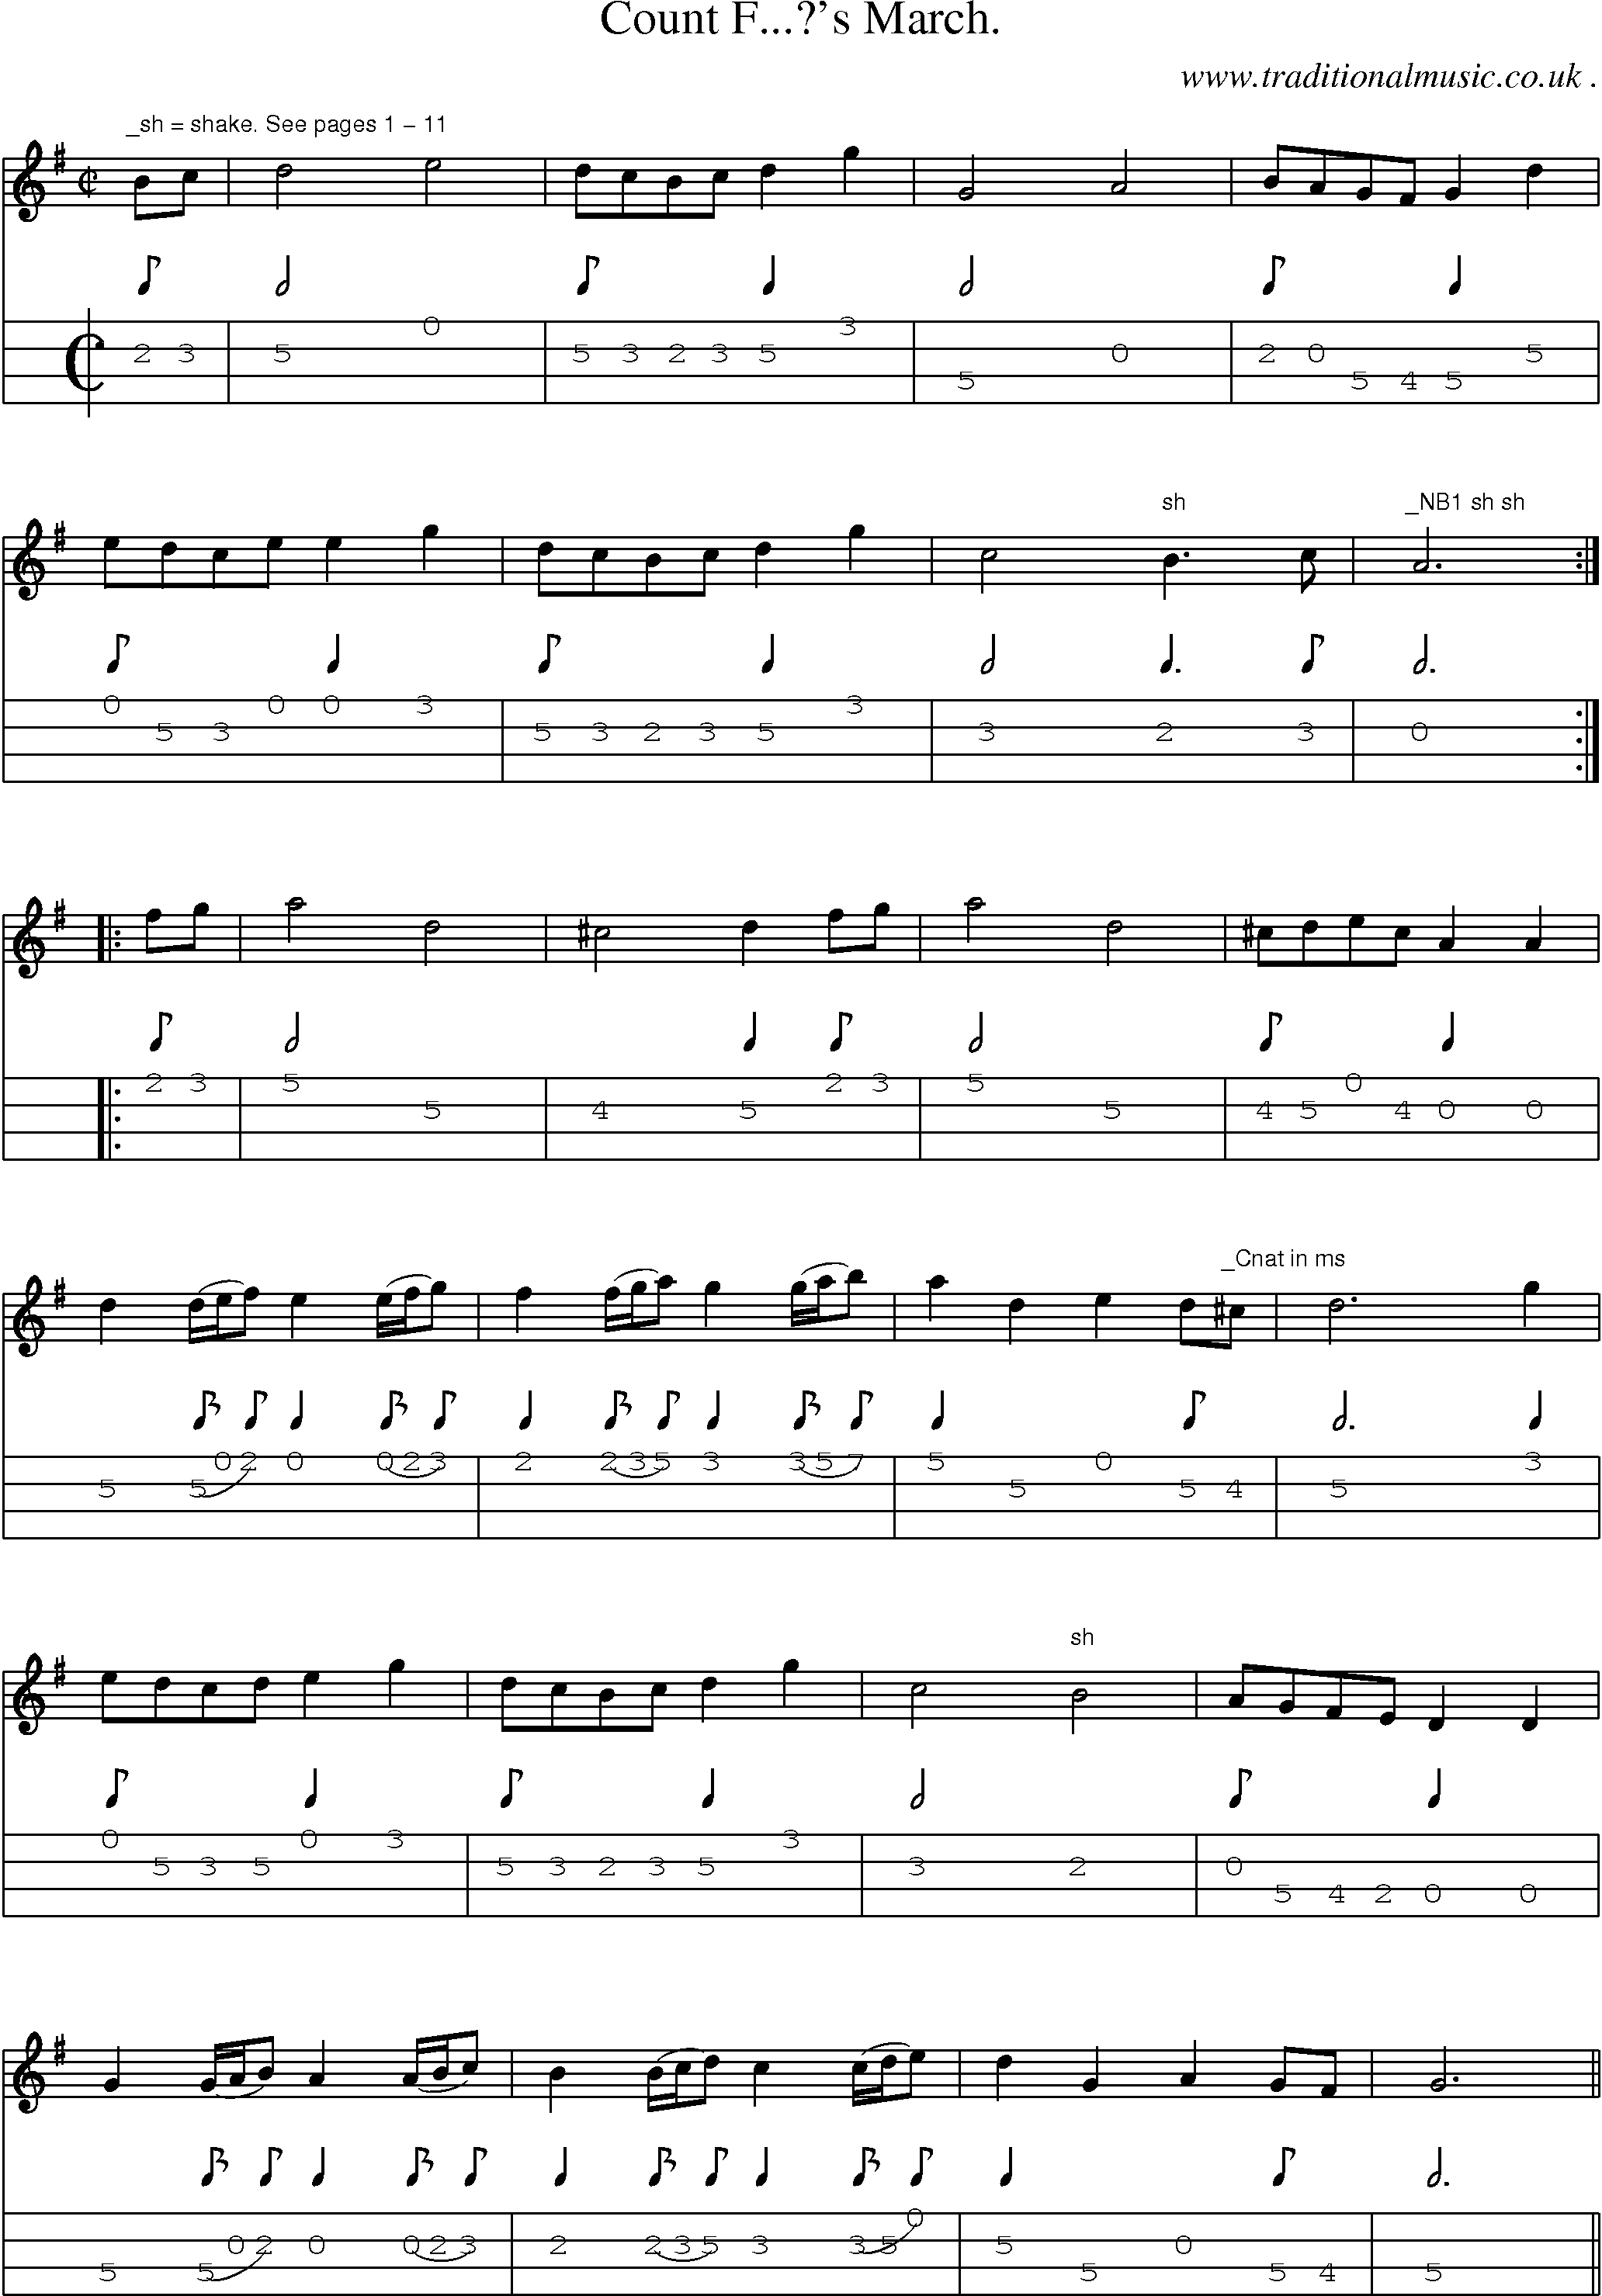 Sheet-Music and Mandolin Tabs for Count Fs March